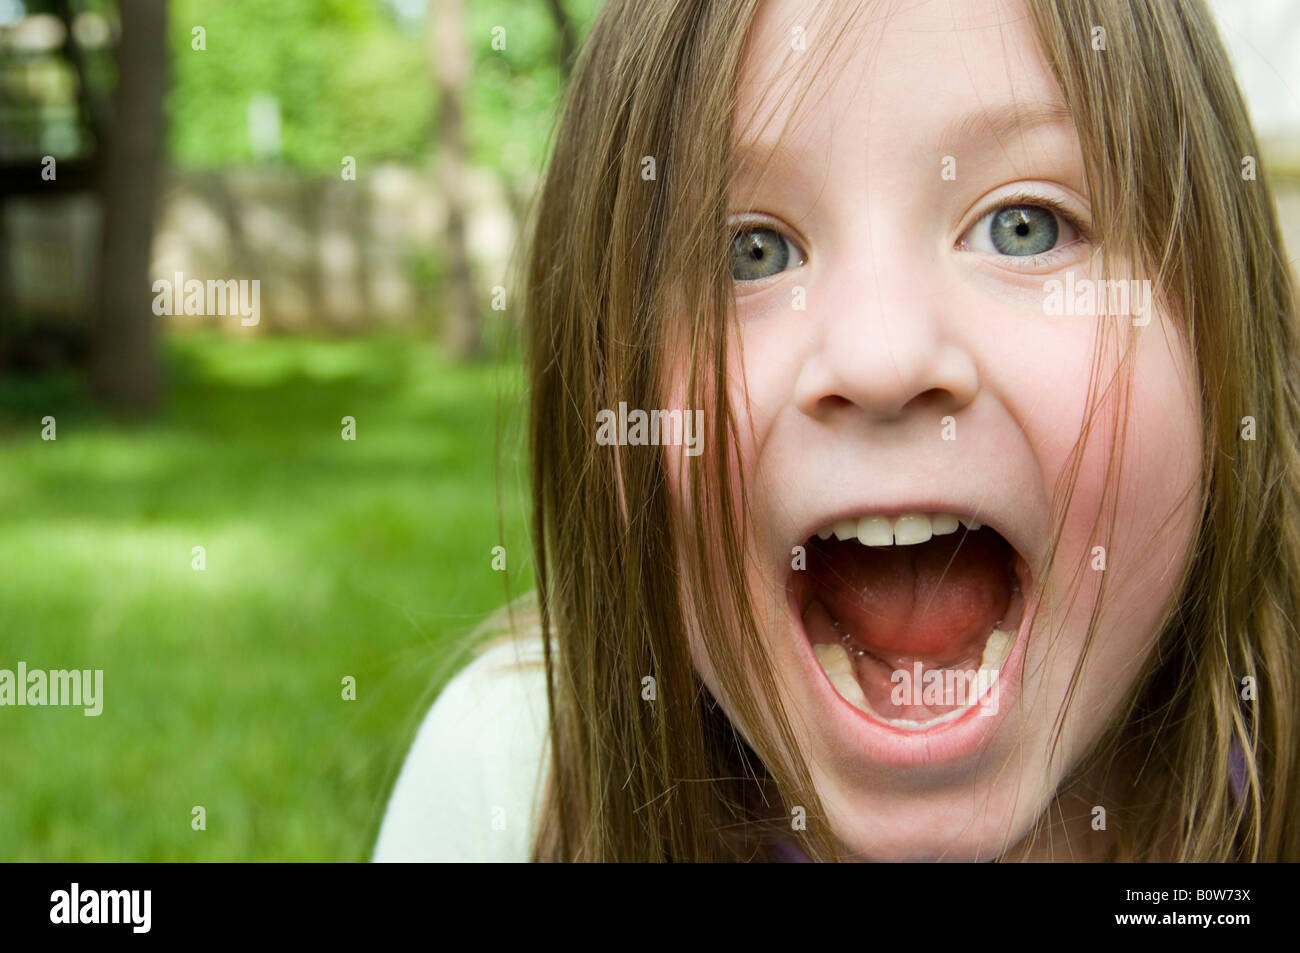 Closeup of little girl's face, mouth wide open as she yells. Stock Photo